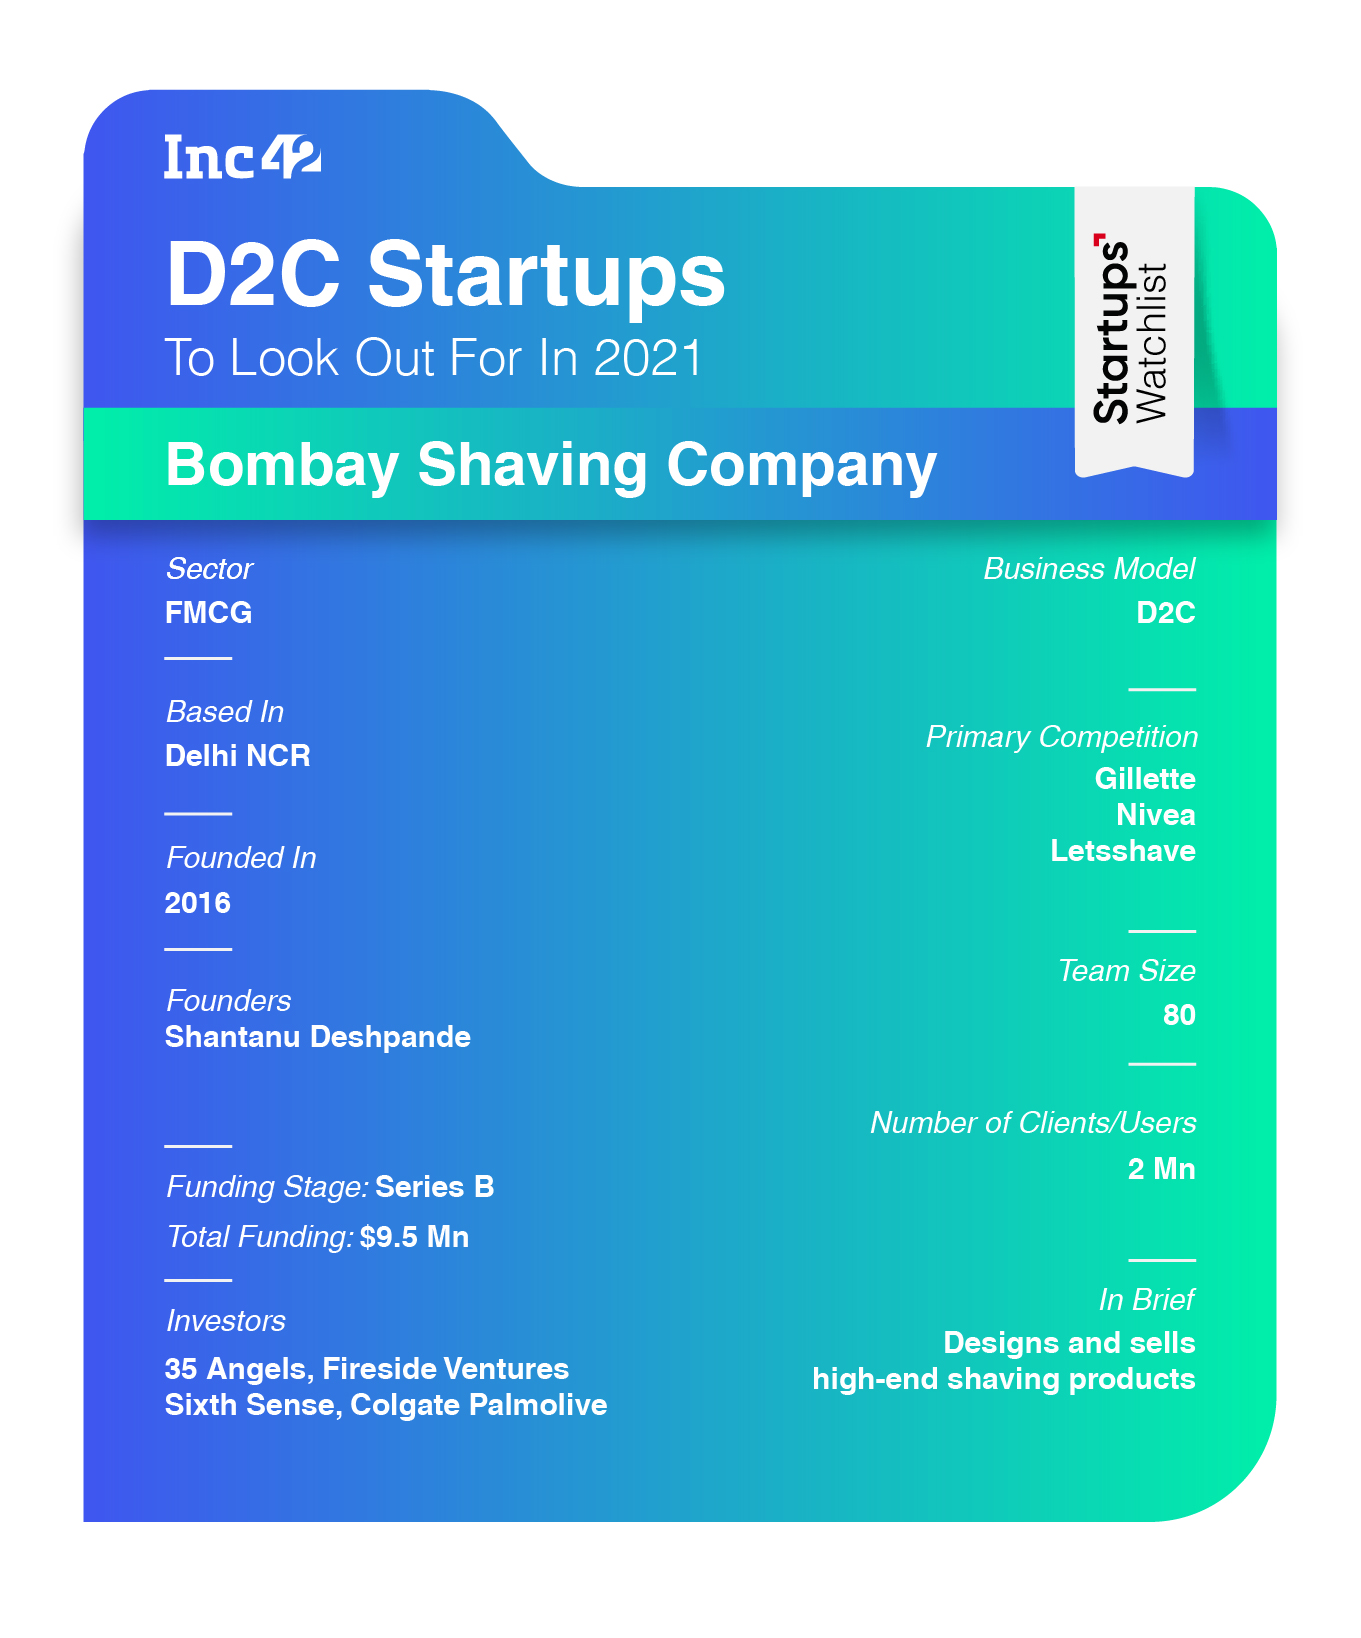 Bombay Shaving Company: Men’s Grooming Brand Powered By Superfoods 